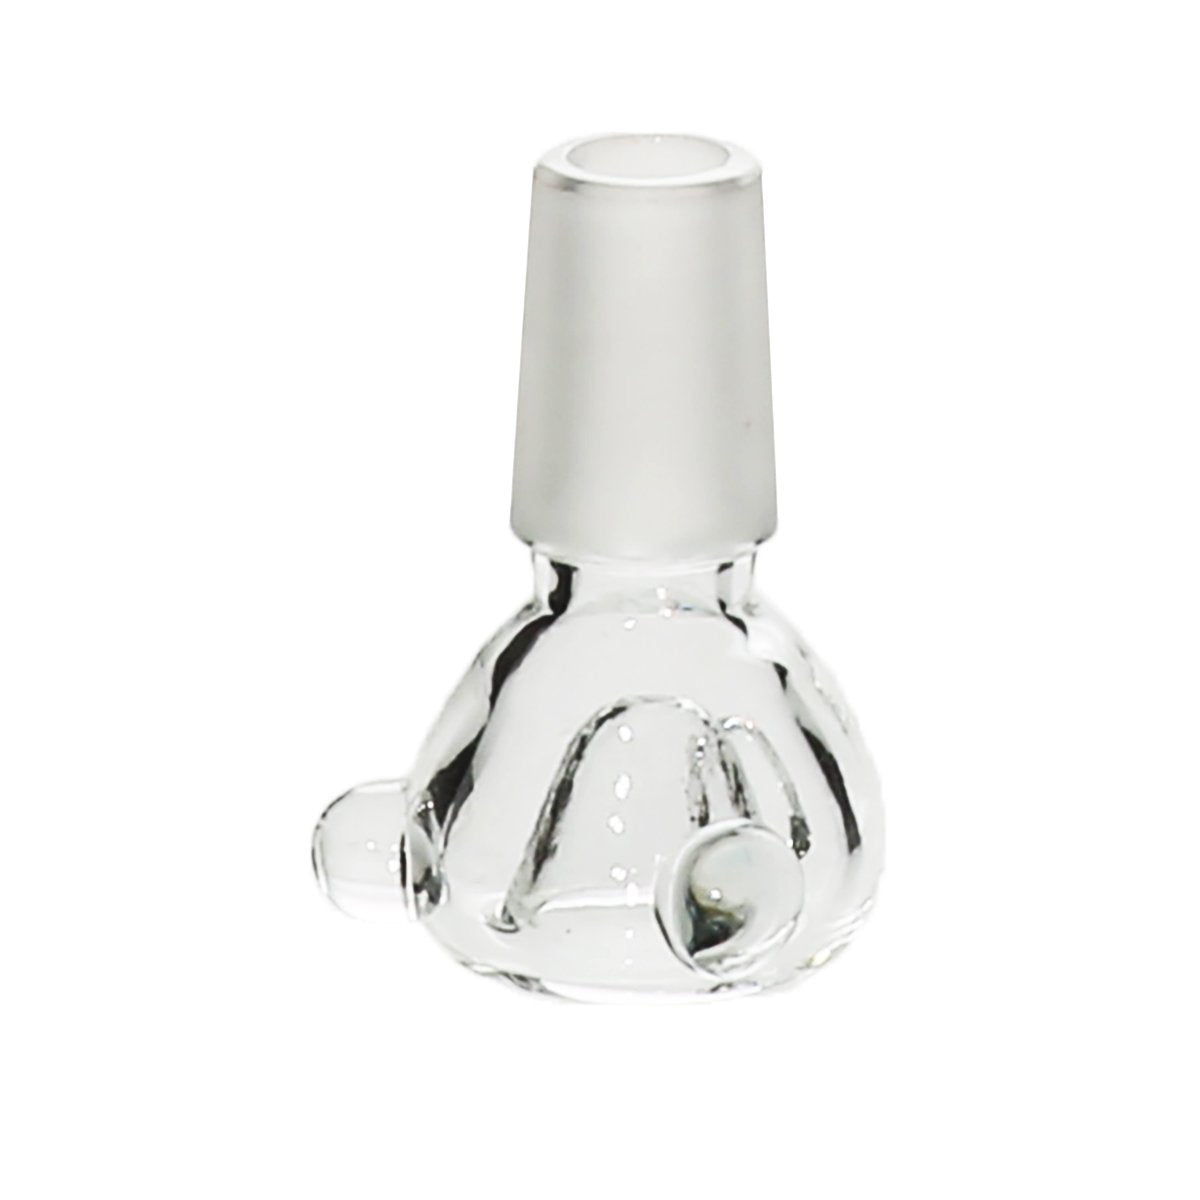 19Mm Bowl - Clear Accessories